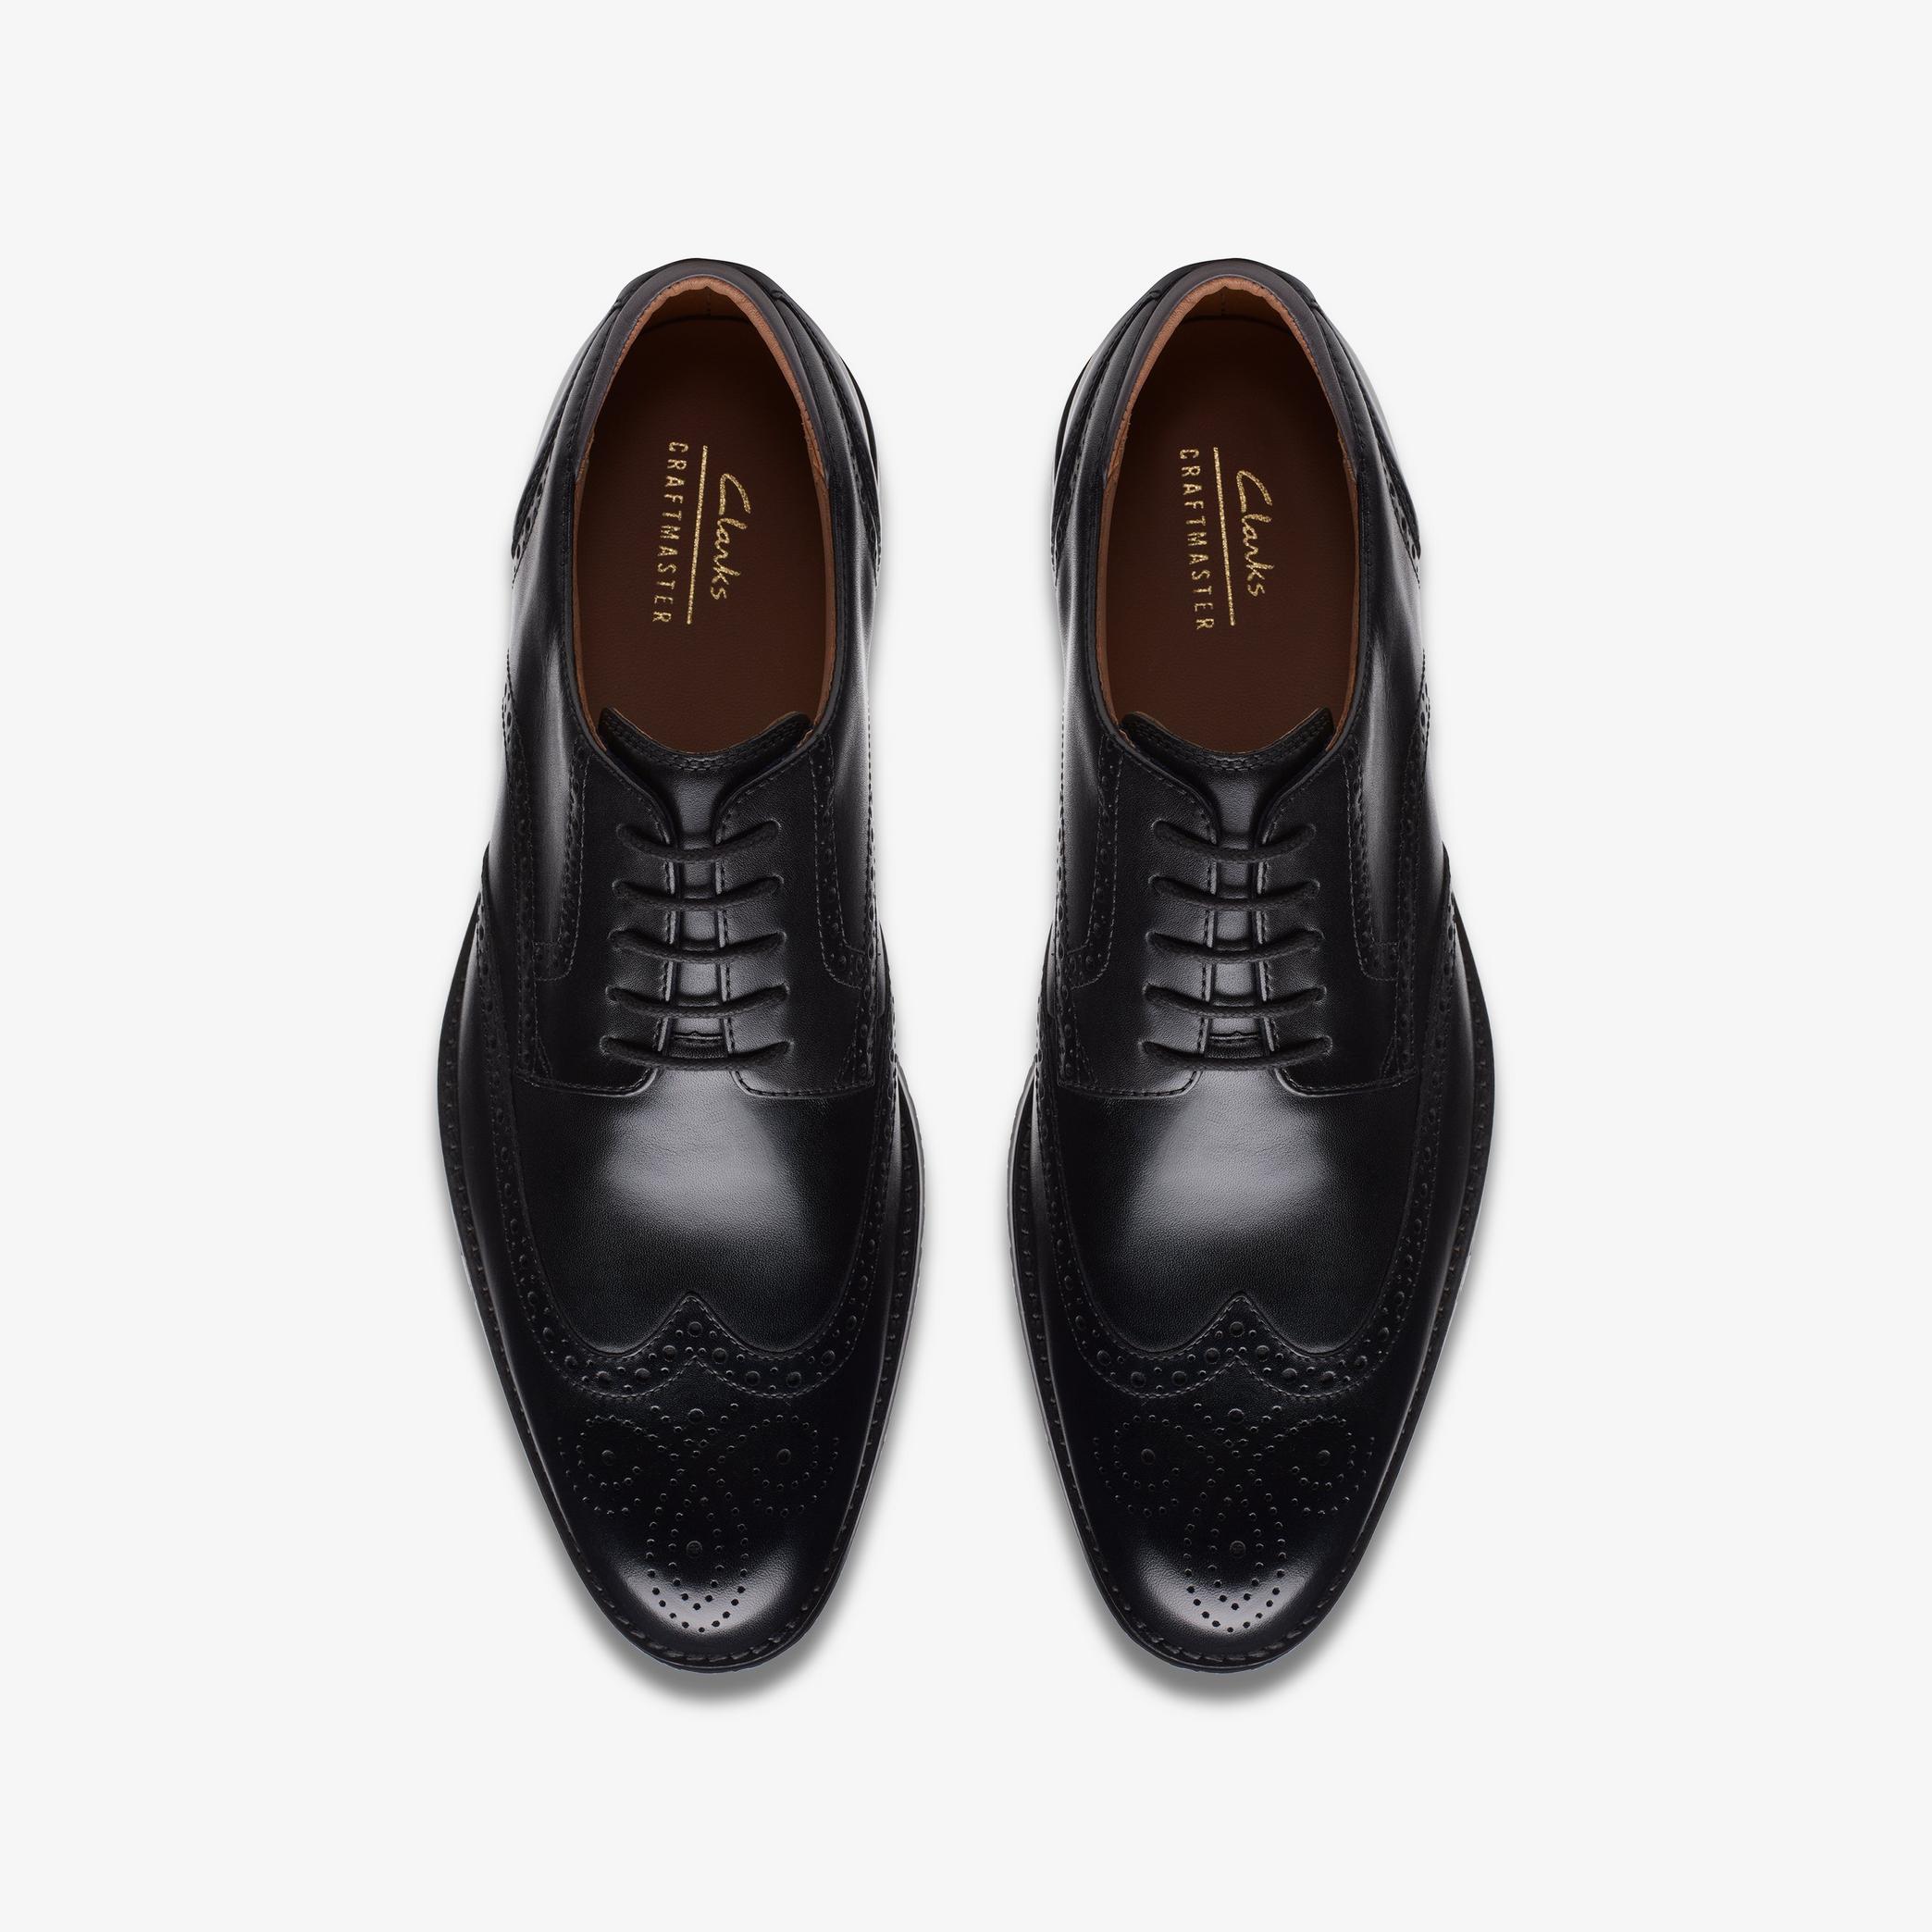 Craft Arlo Limit Black Leather Oxford Shoes, view 6 of 6